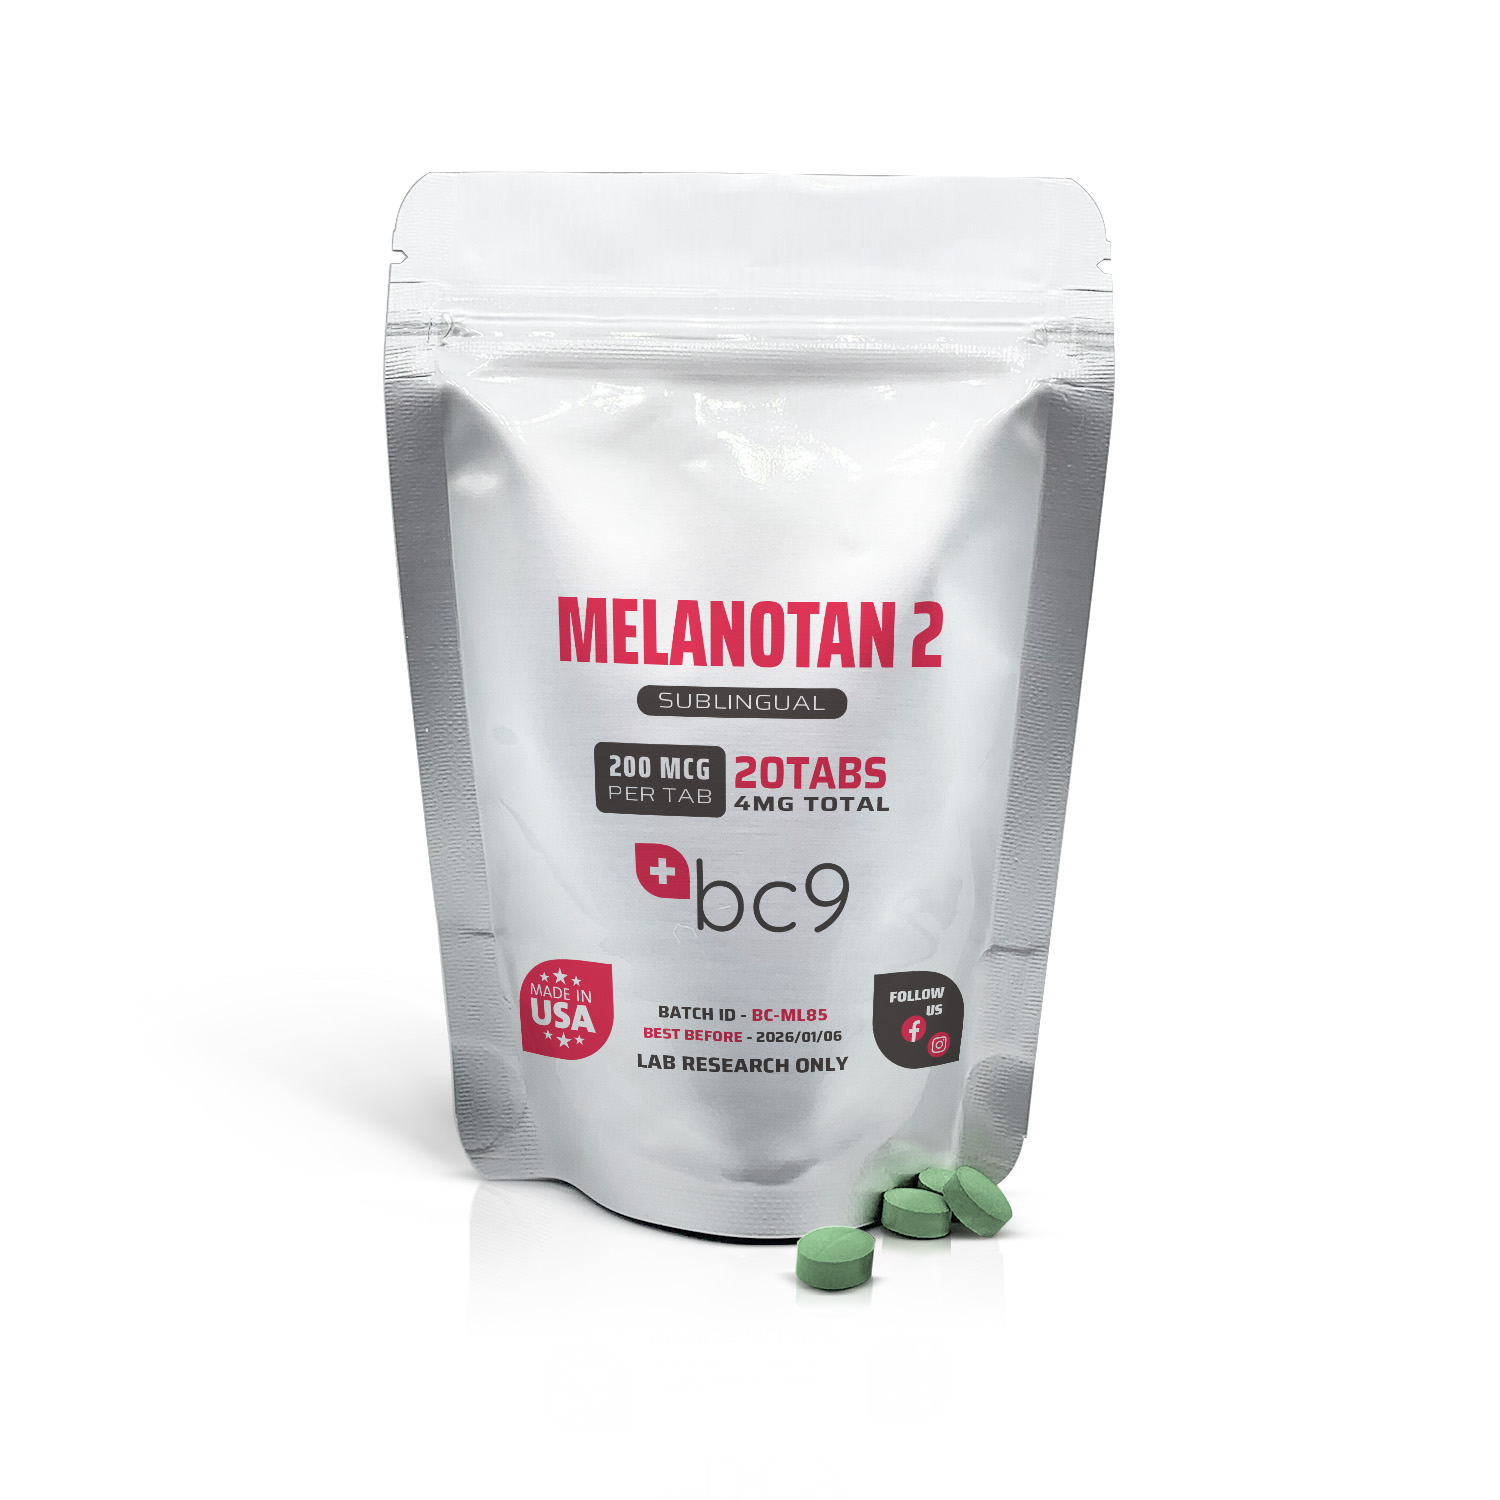 Melanotan-2 For Sale | 3rd Party Tested | BC9.org